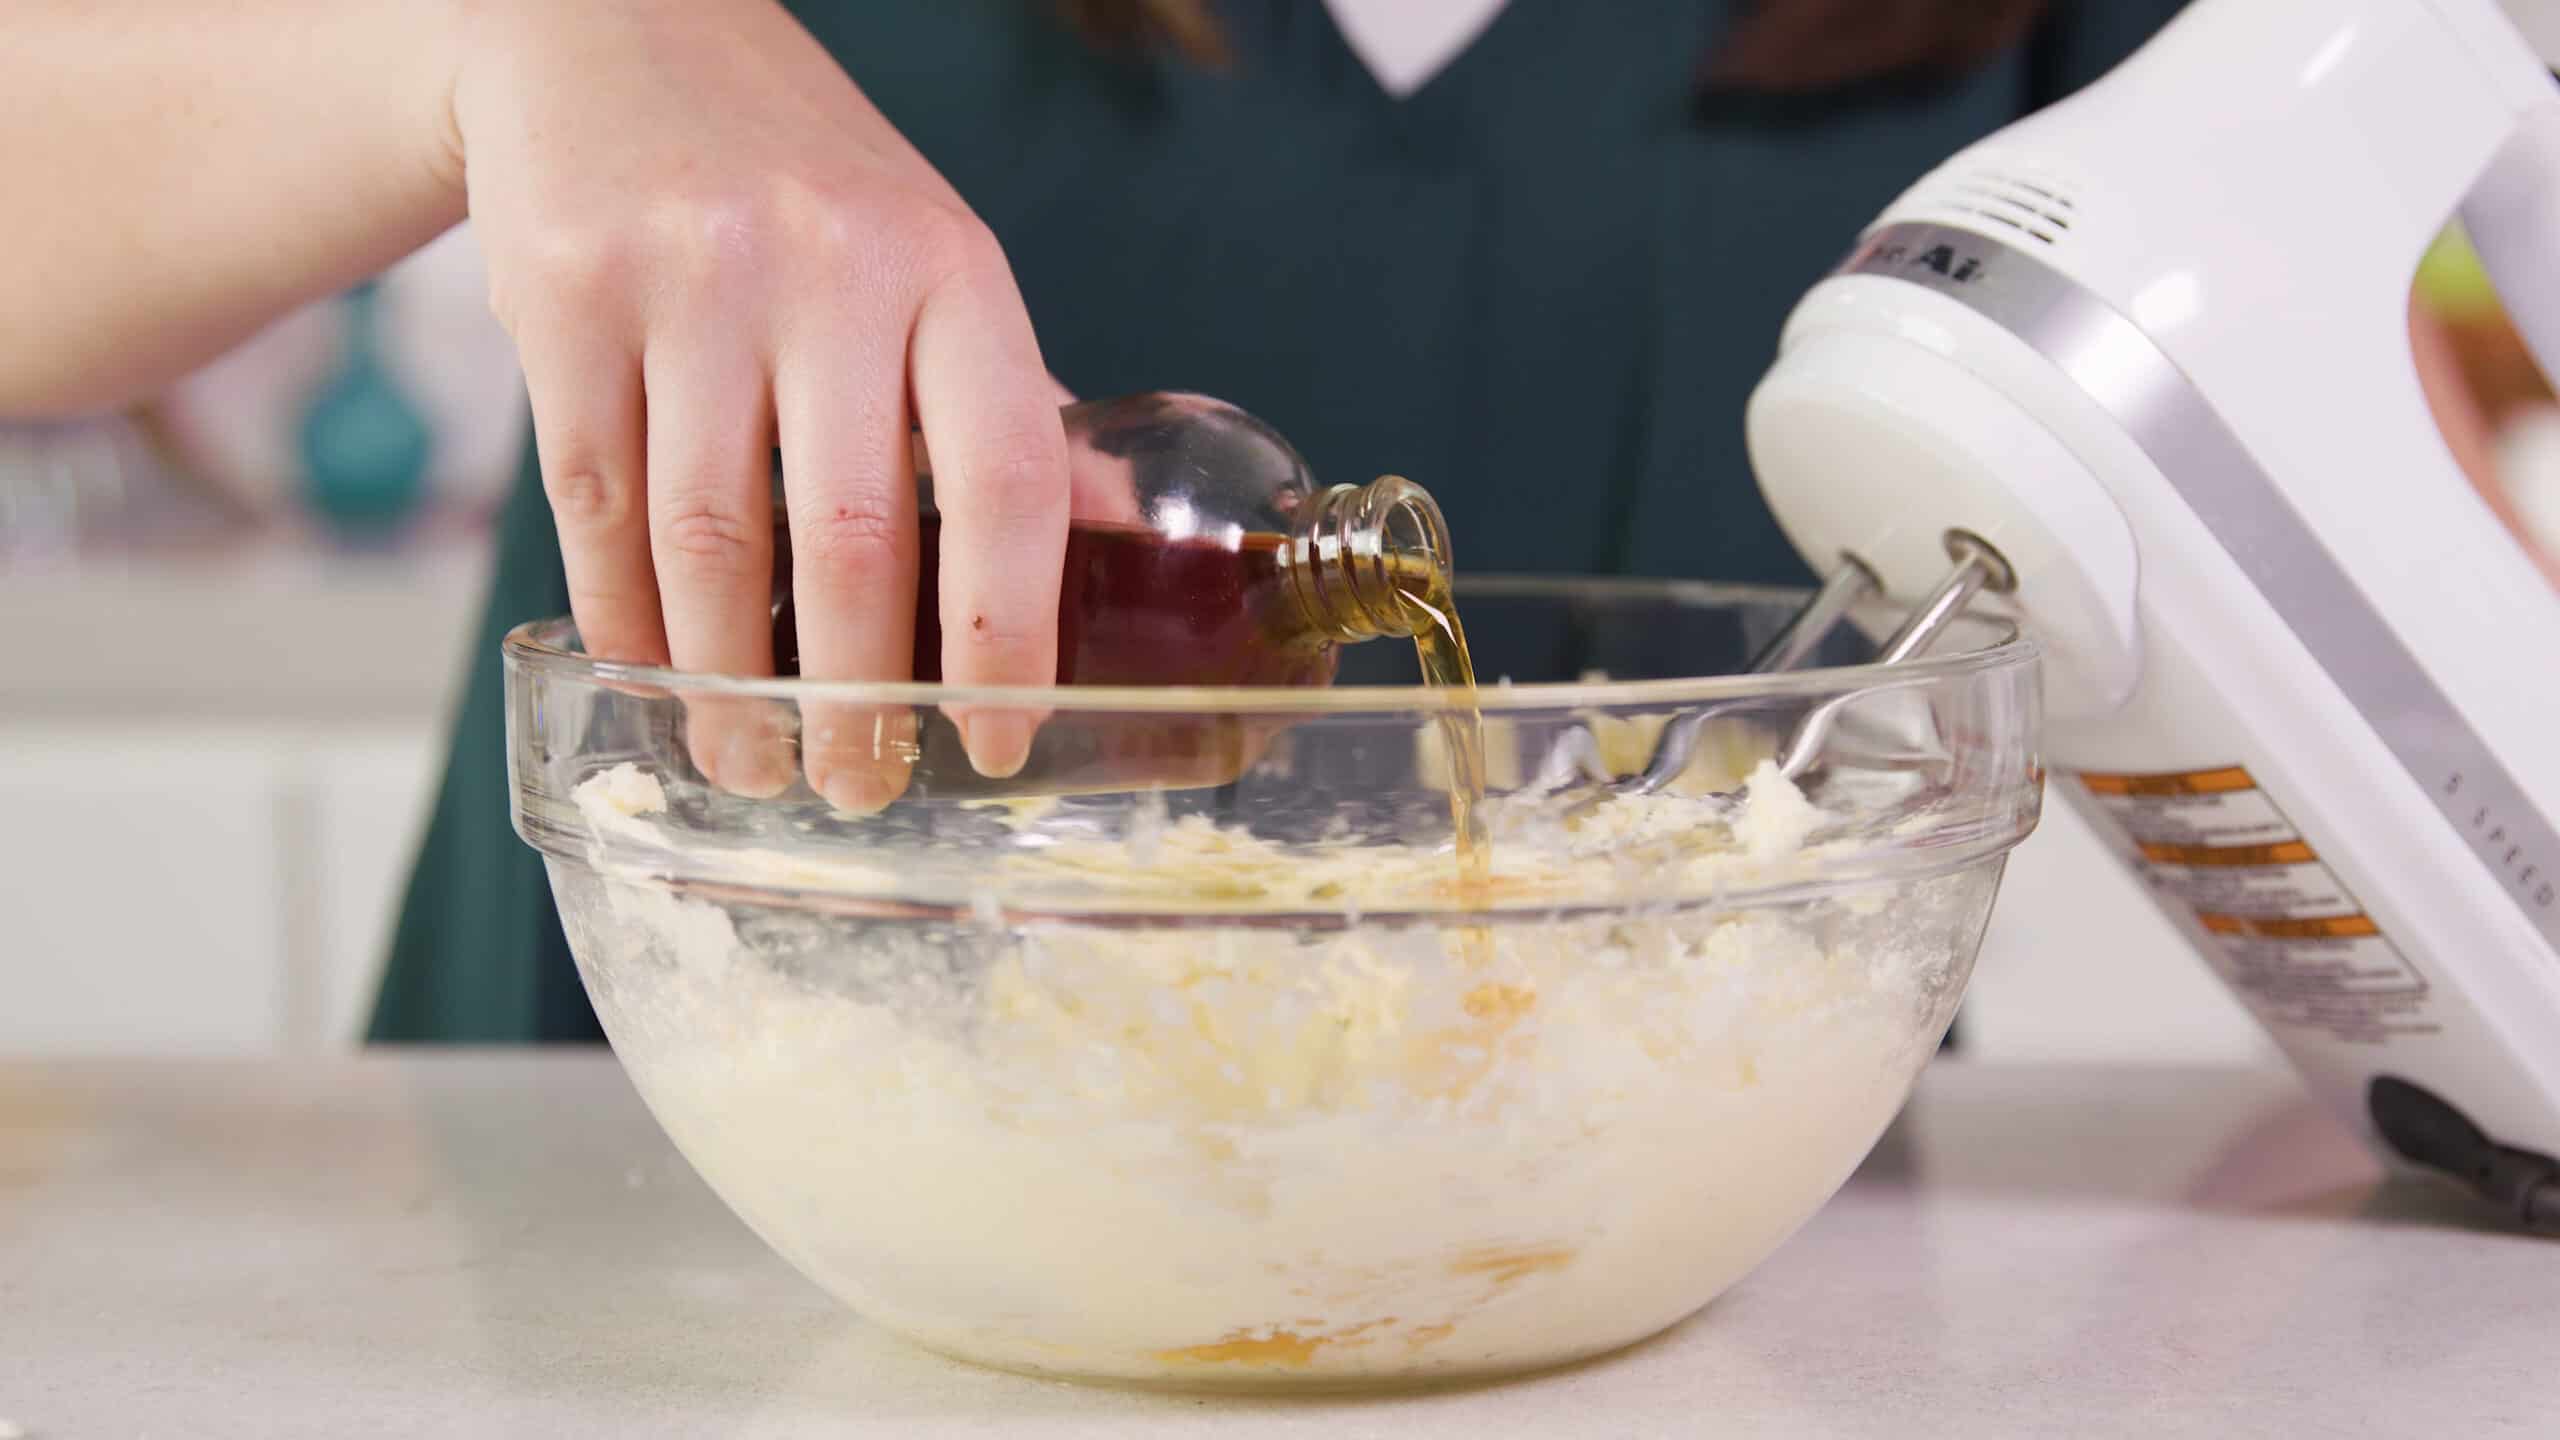 Side view of a large clear glass mixing bowl filled with cookie batter and a hand pouring vanilla extract from a clear glass bottle and a hand mixer leaning in the bowl in the background.